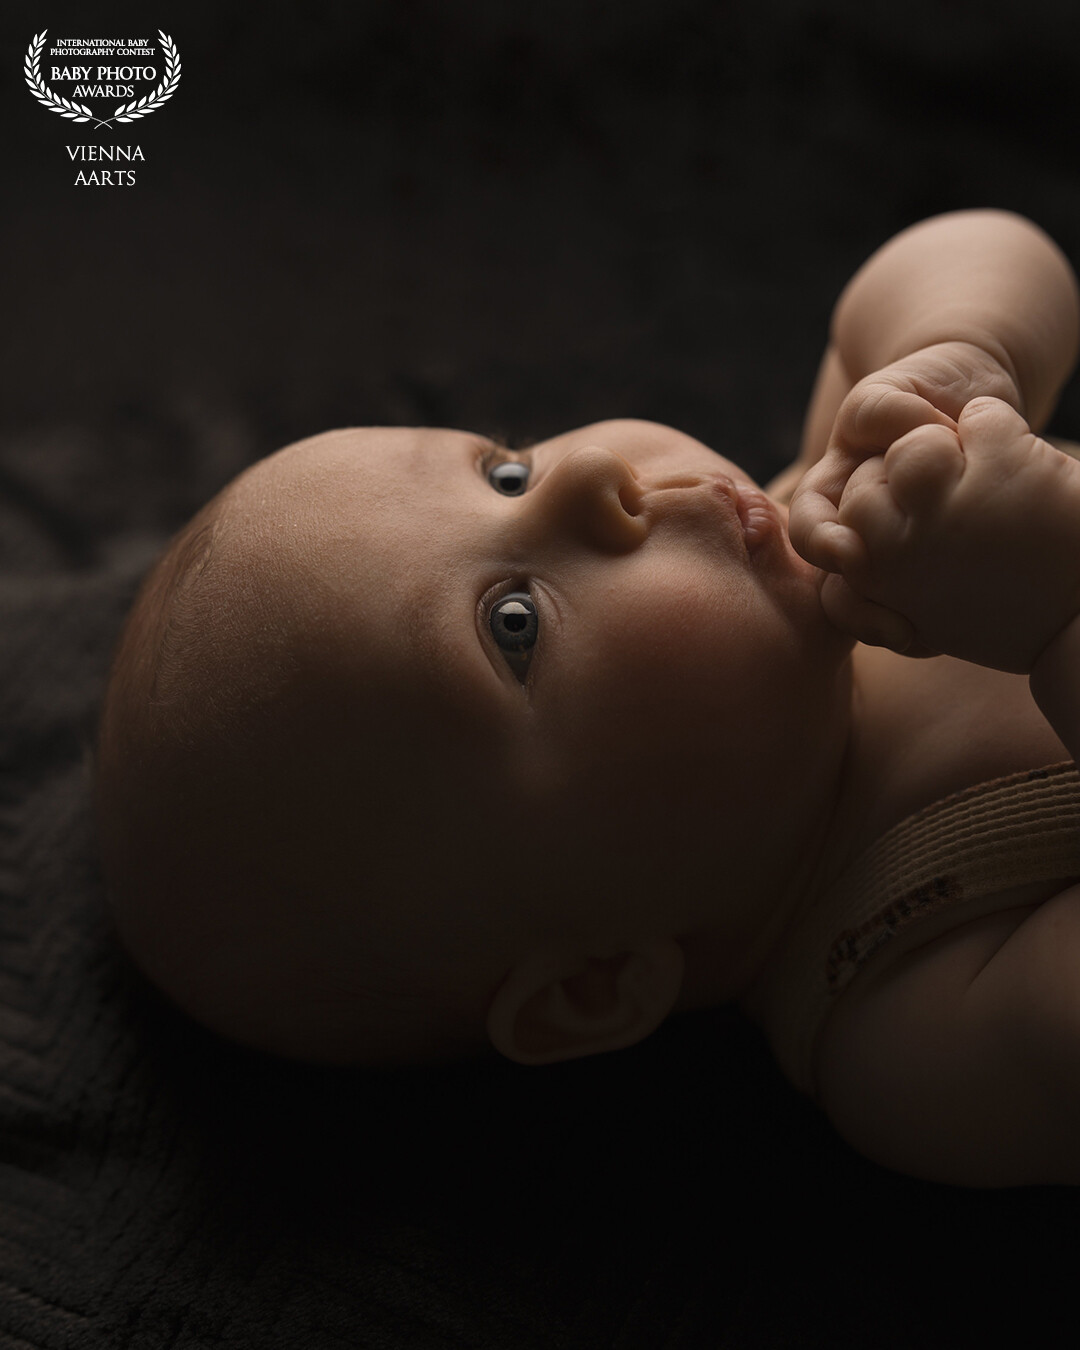 This beautiful three month old baby was so lovely to photograph! He was really looking to me through the camera.